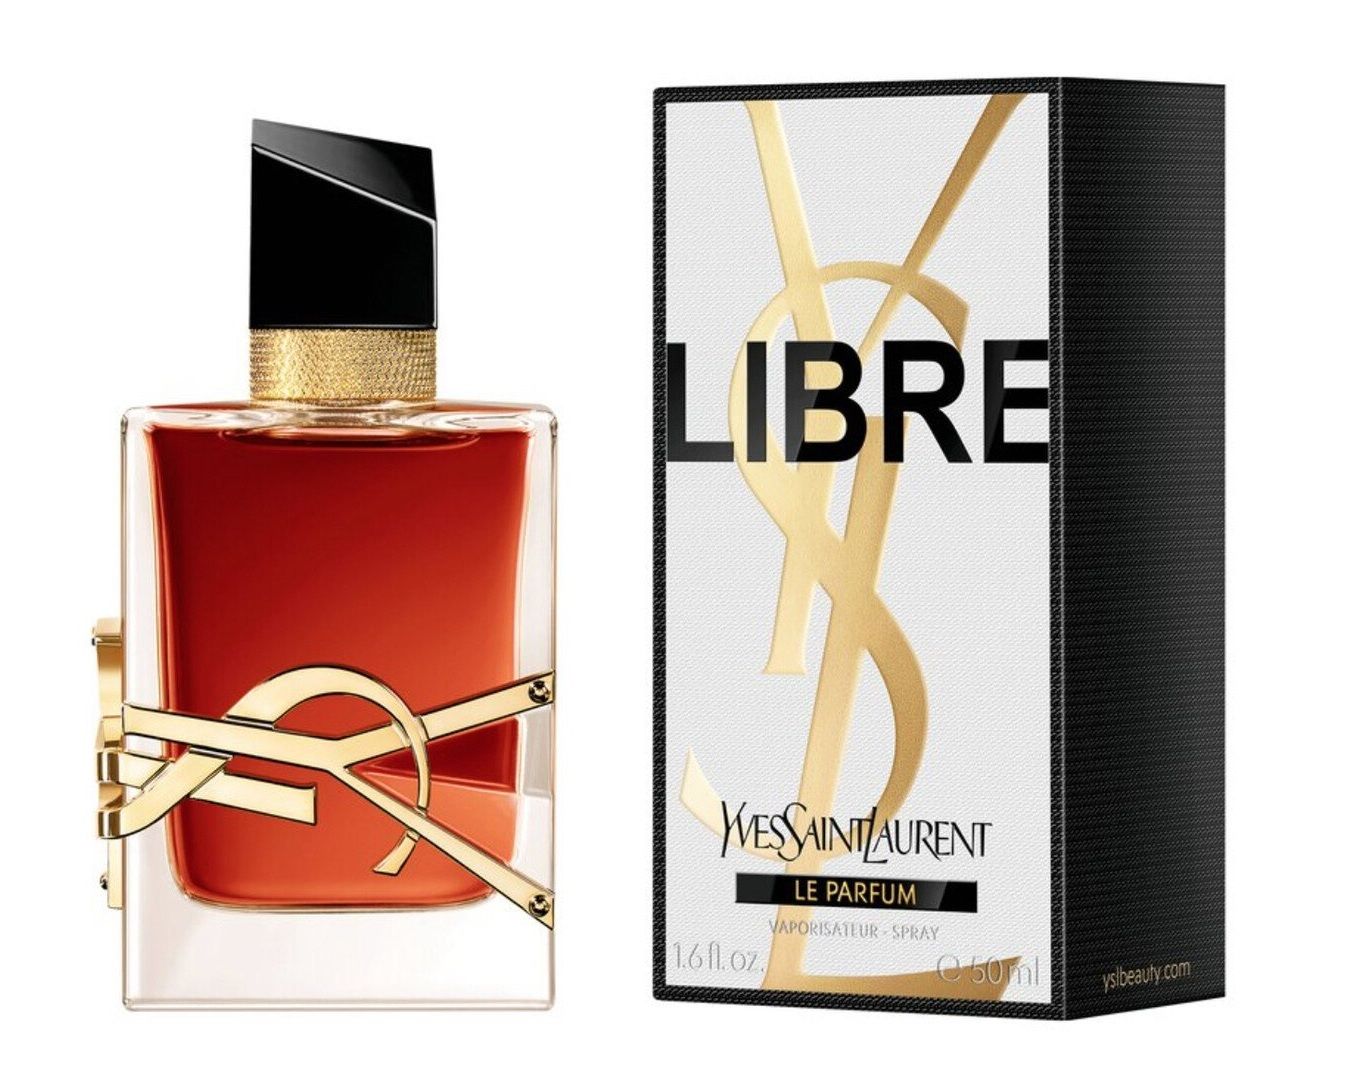 Have you tried any of these? What did you think? #perfumes #ysllibrepl